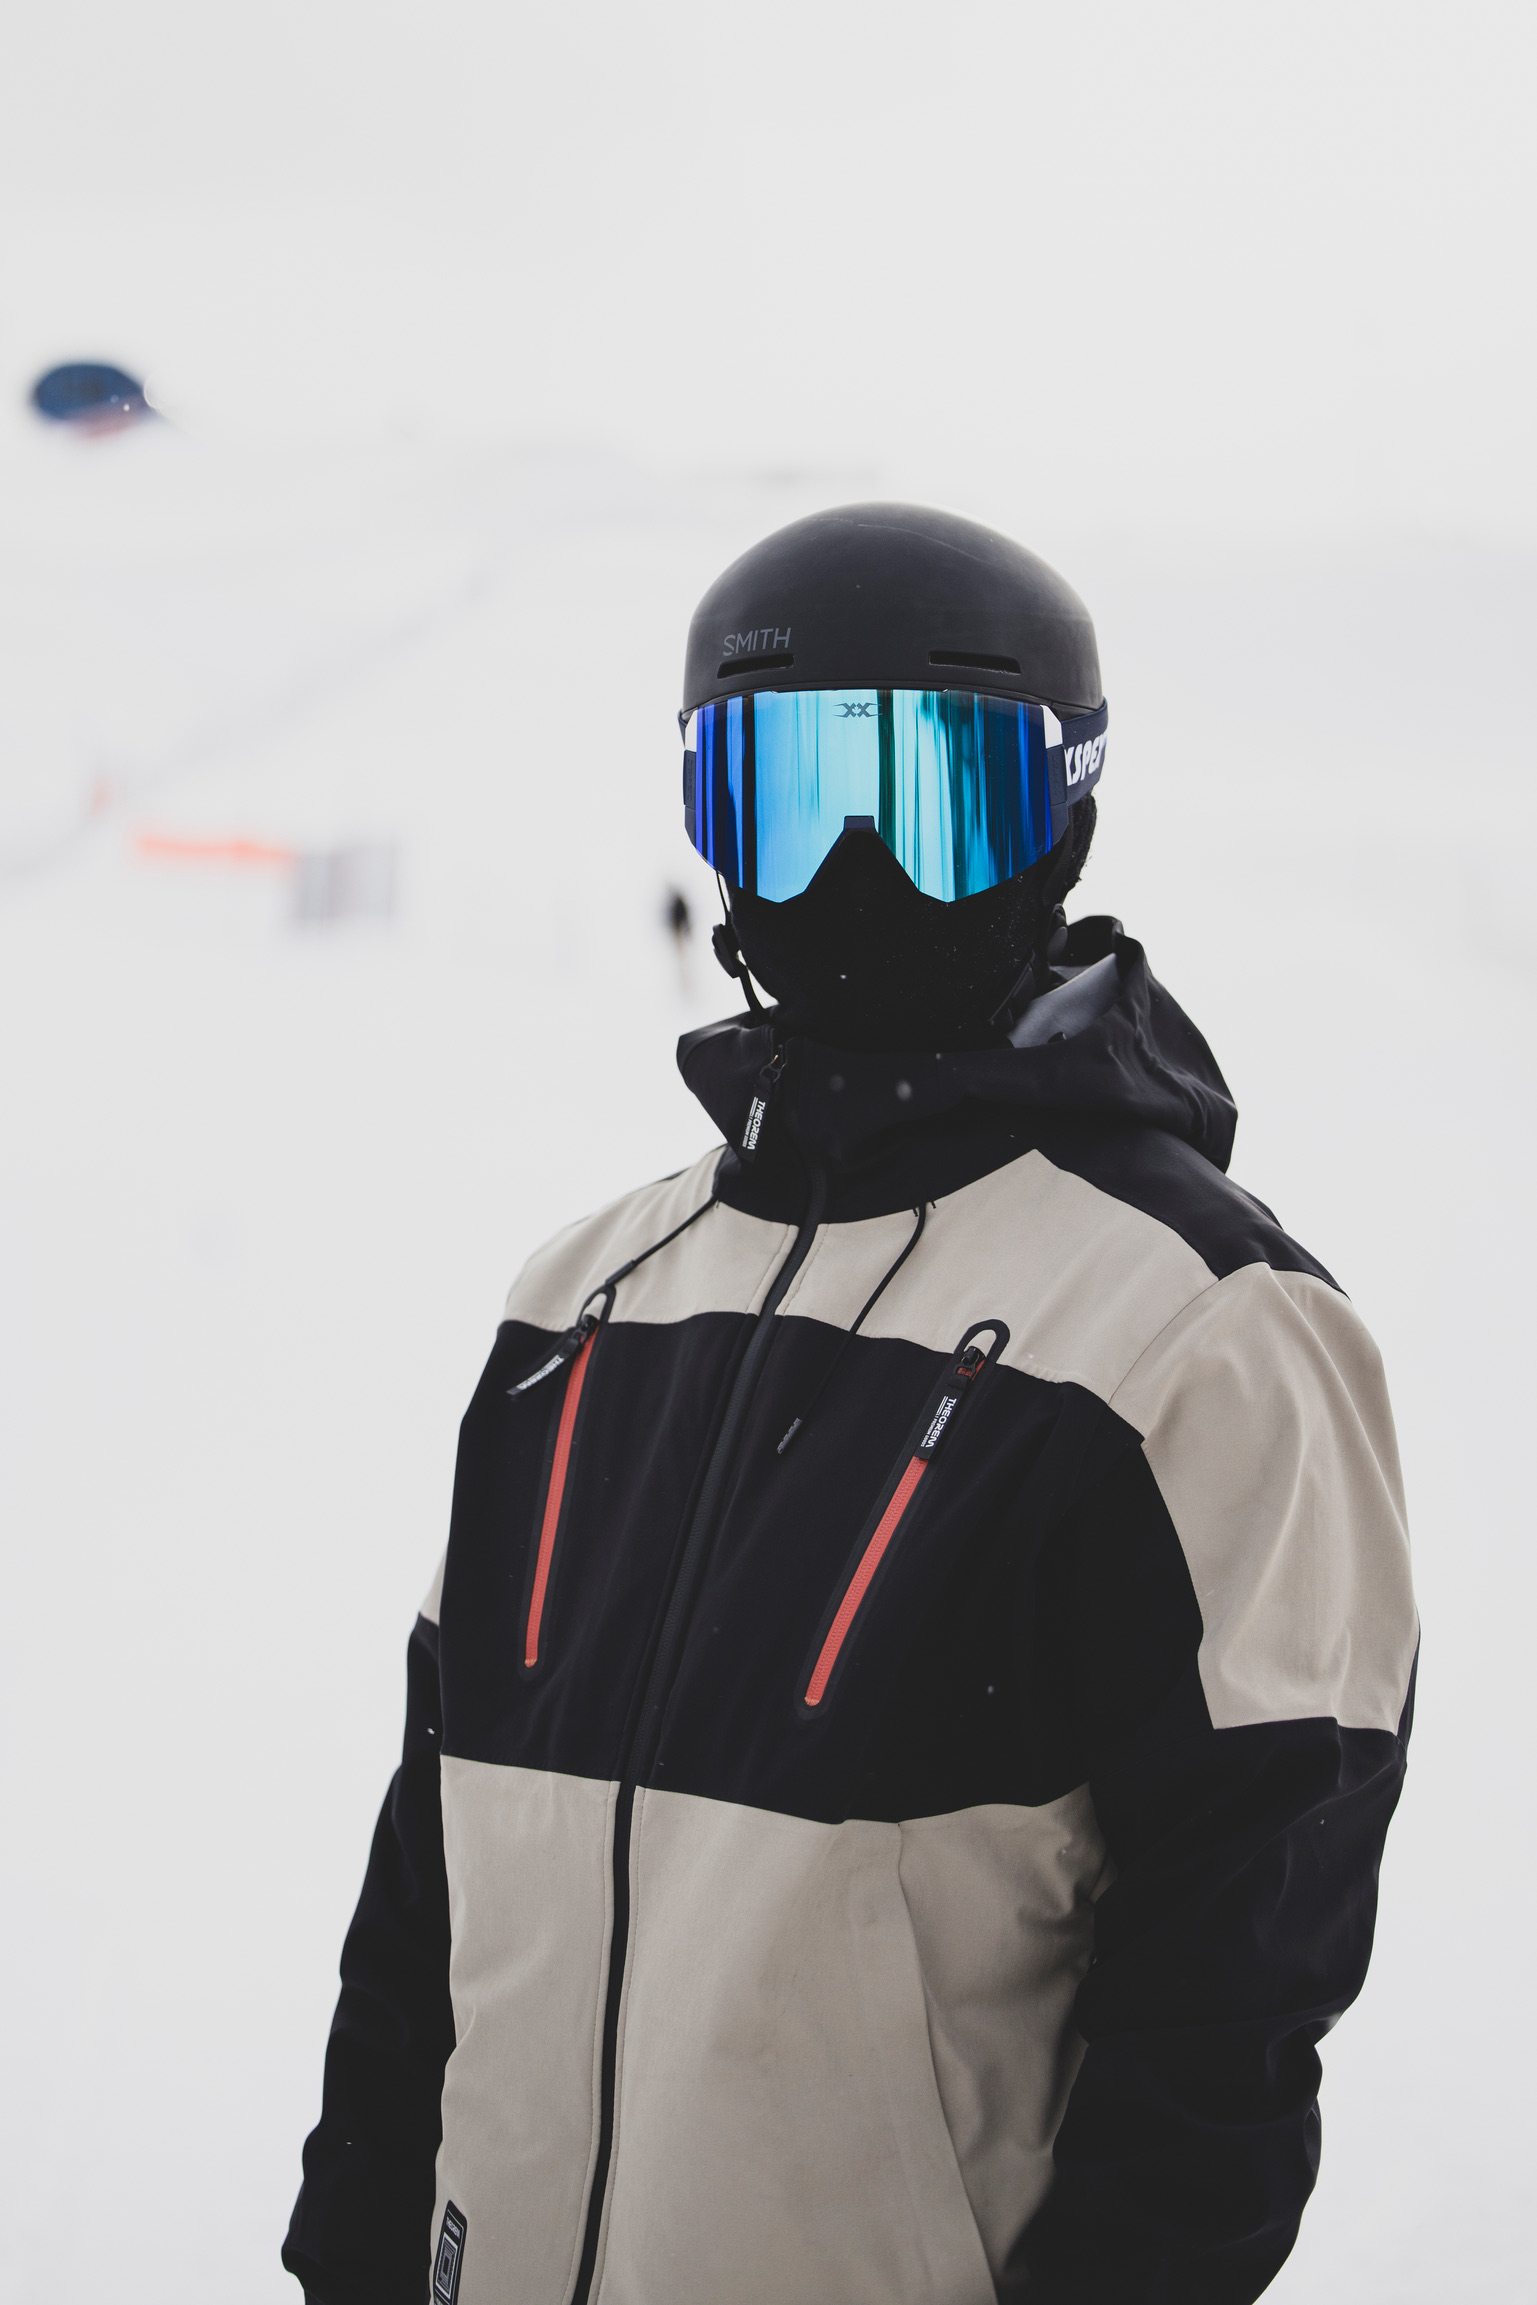 A snowboarder wearing a black helmet, reflective blue goggles, and a black and white jacket